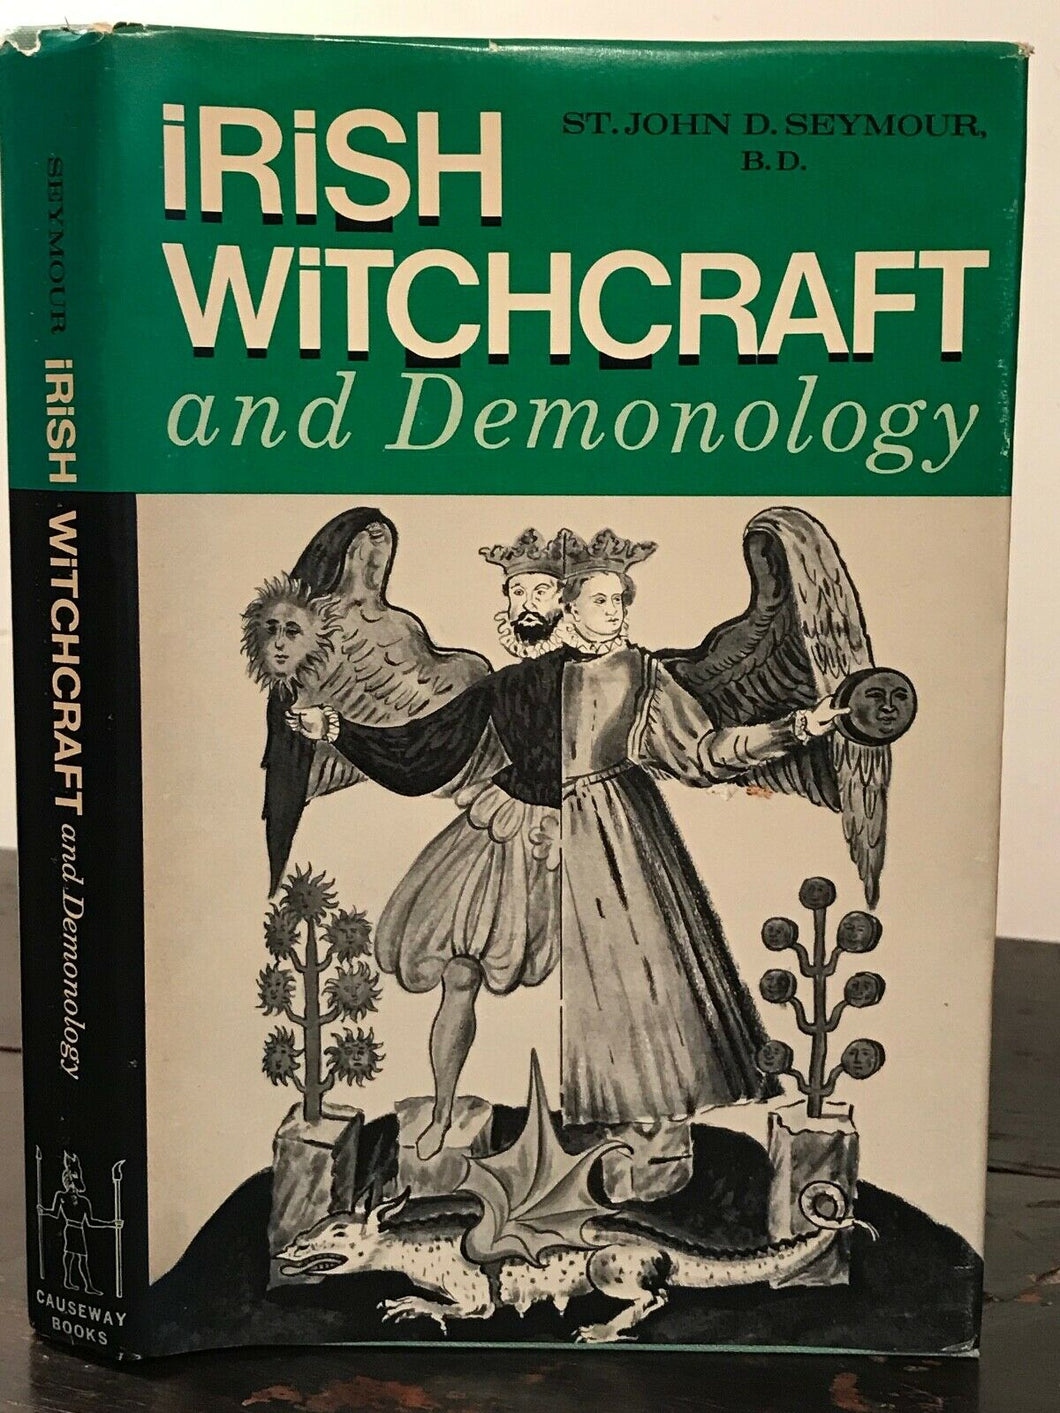 IRISH WITCHCRAFT AND DEMONOLOGY - 1st, 1973 - DEMONS CURSES POSSESSION PROPHECY